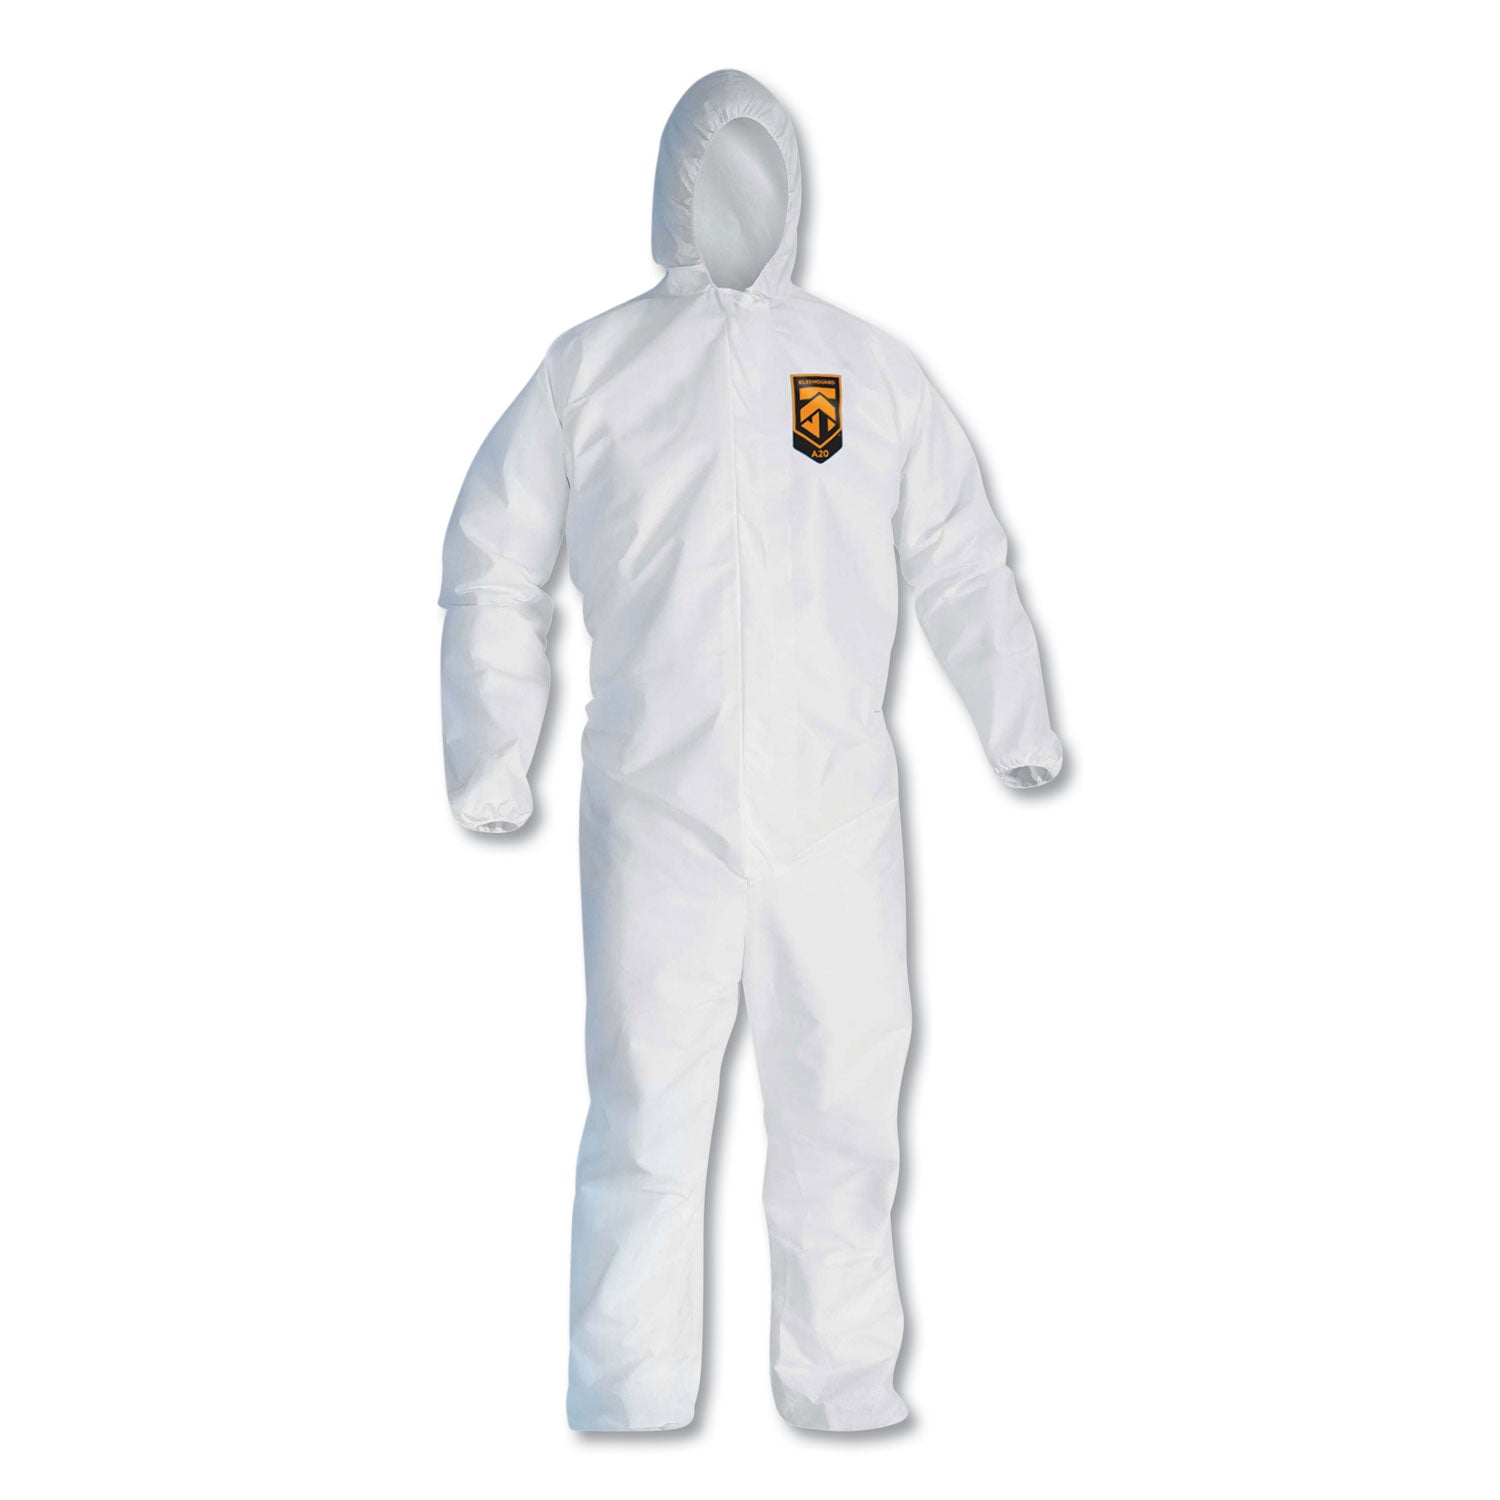 a20-elastic-back-cuff-and-ankles-hooded-coveralls-4x-large-white-20-carton_kcc49117 - 1